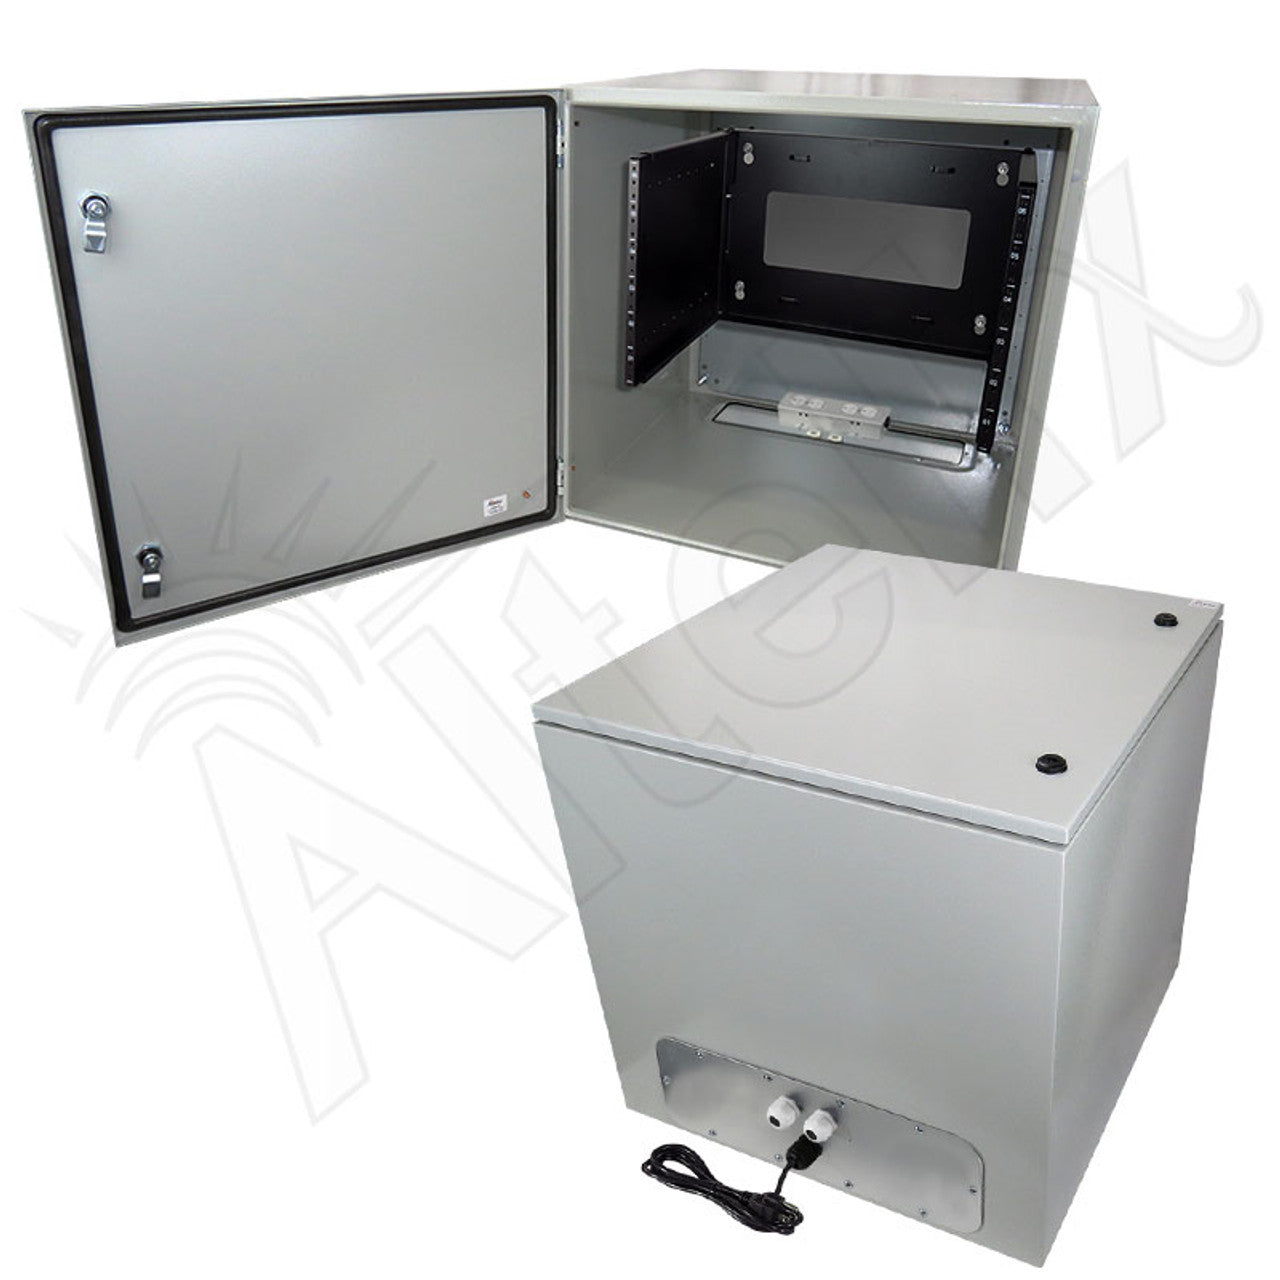 Altelix 19" Wide 6U Rack NEMA 4X Steel Weatherproof Enclosure with 120 VAC Outlets and Power Cord-4